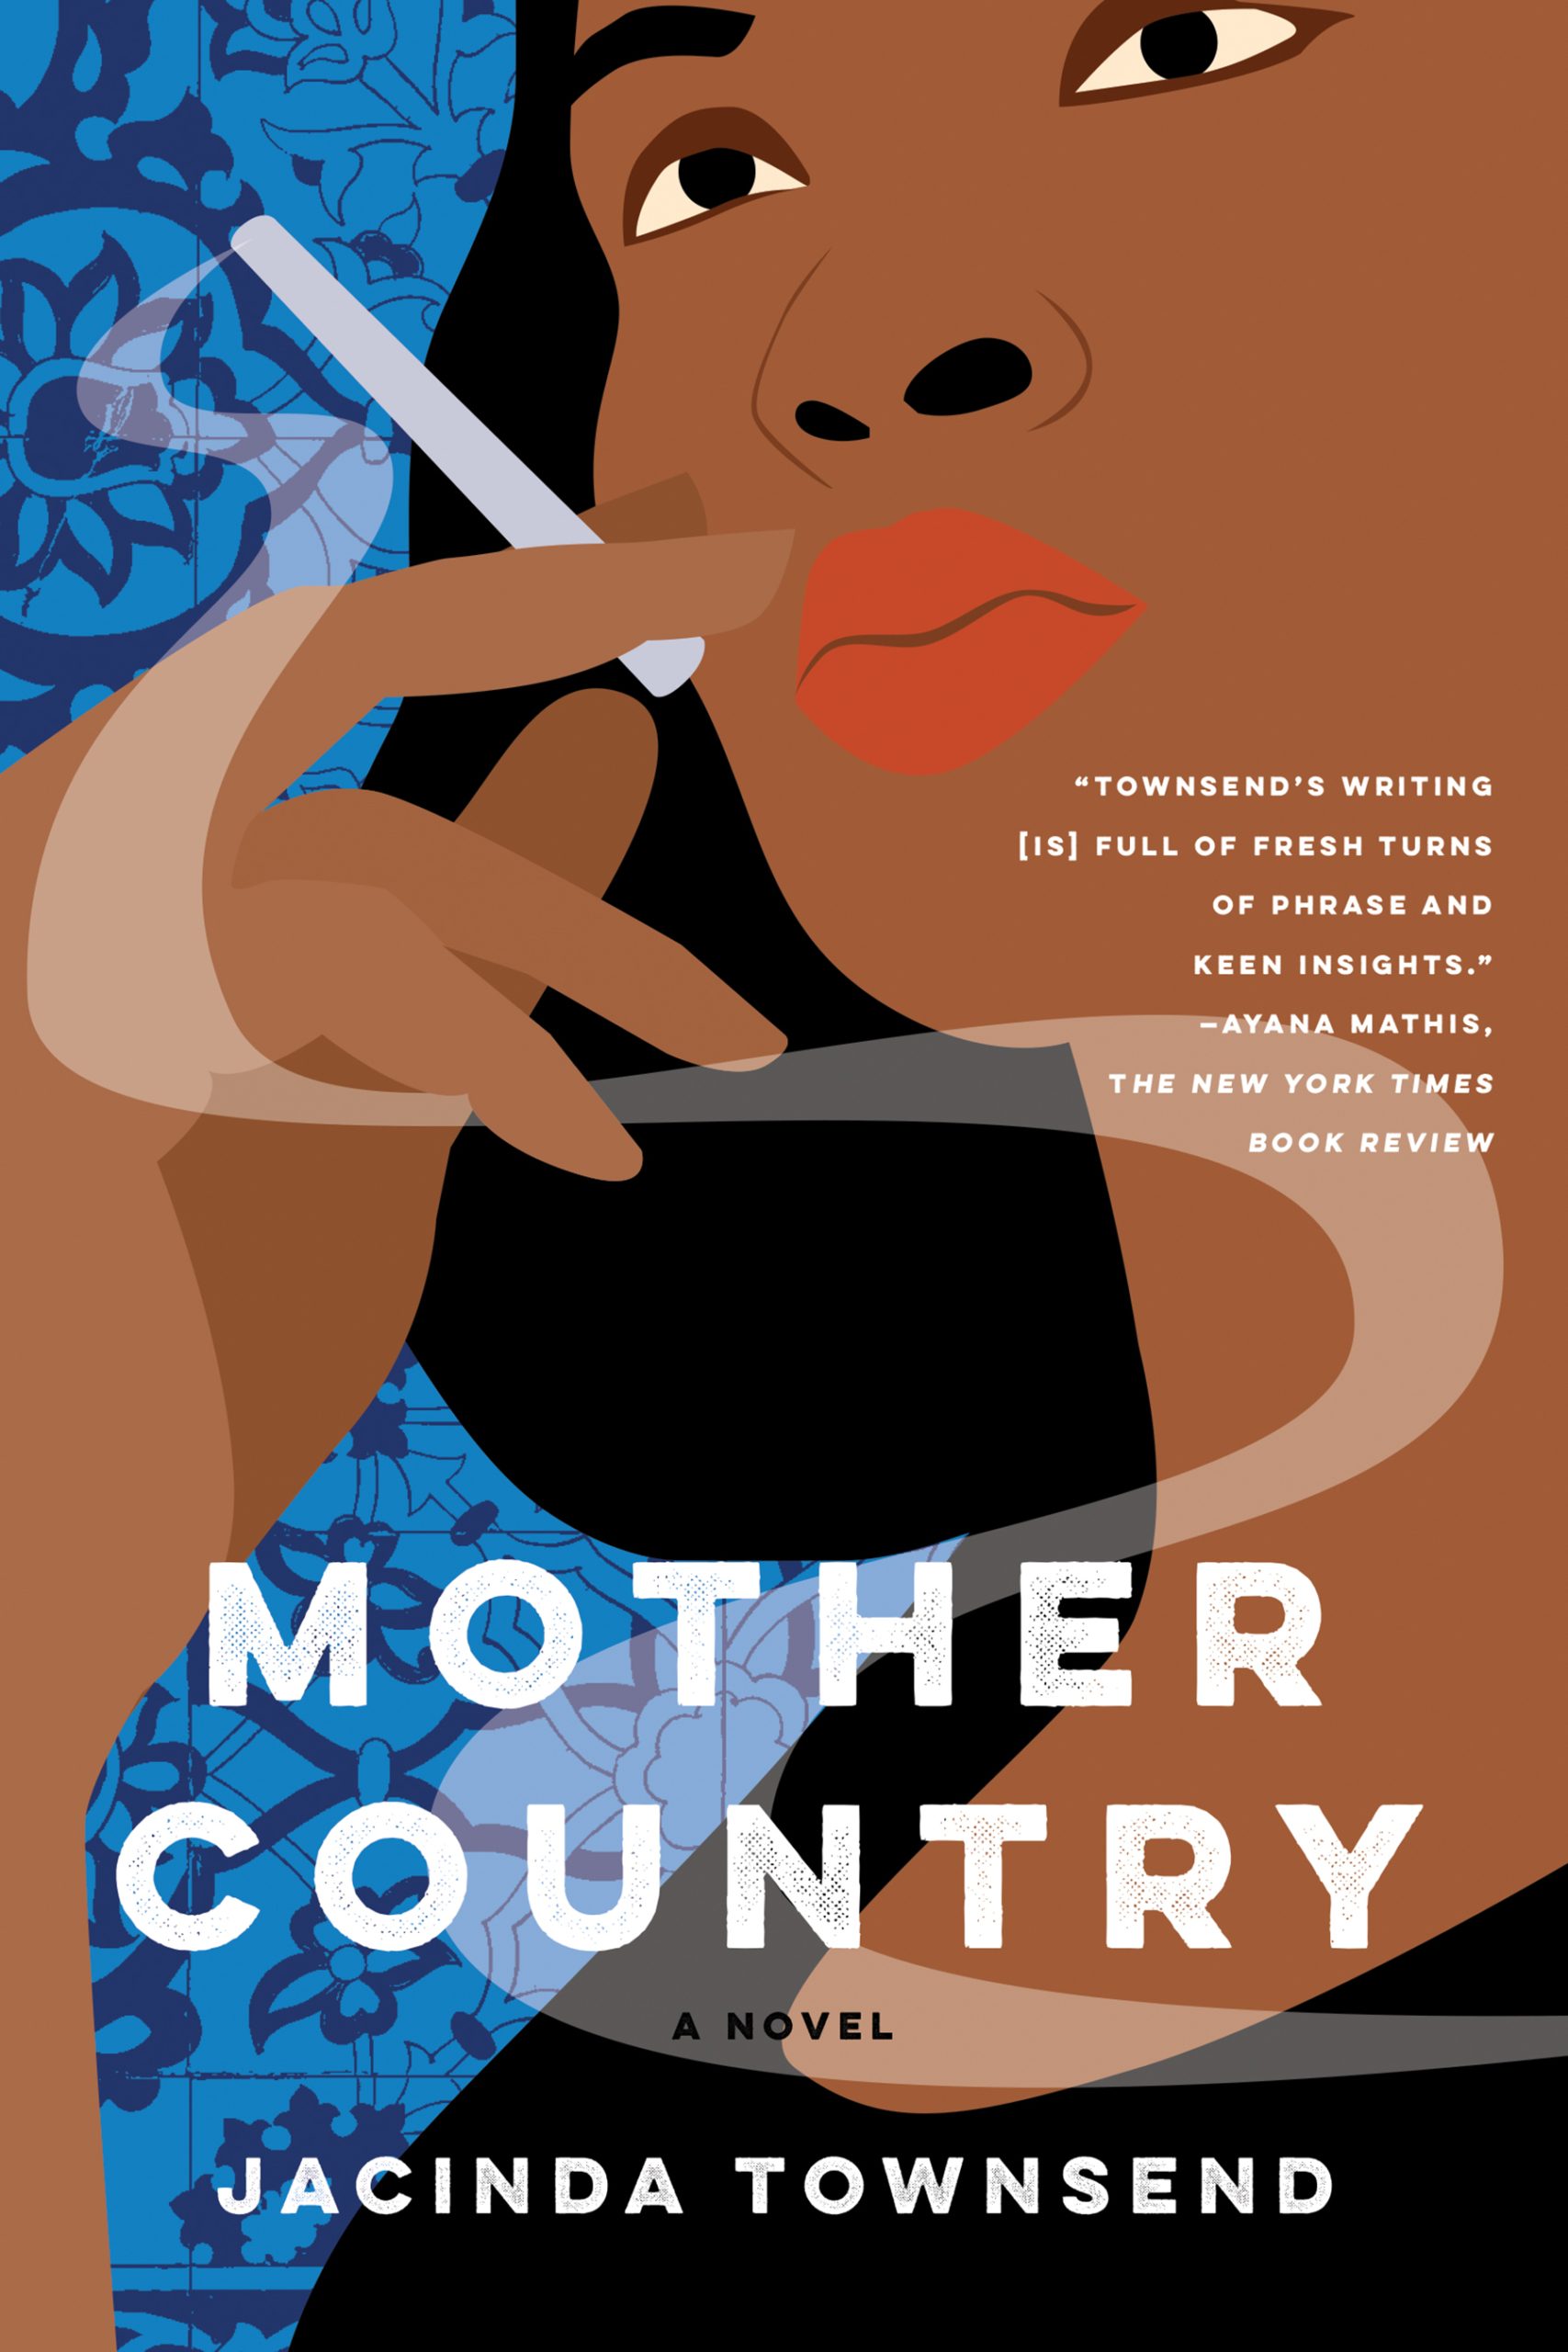 The cover of the novel MOTHER COUNTRY features a painting of a brown face against a blue background